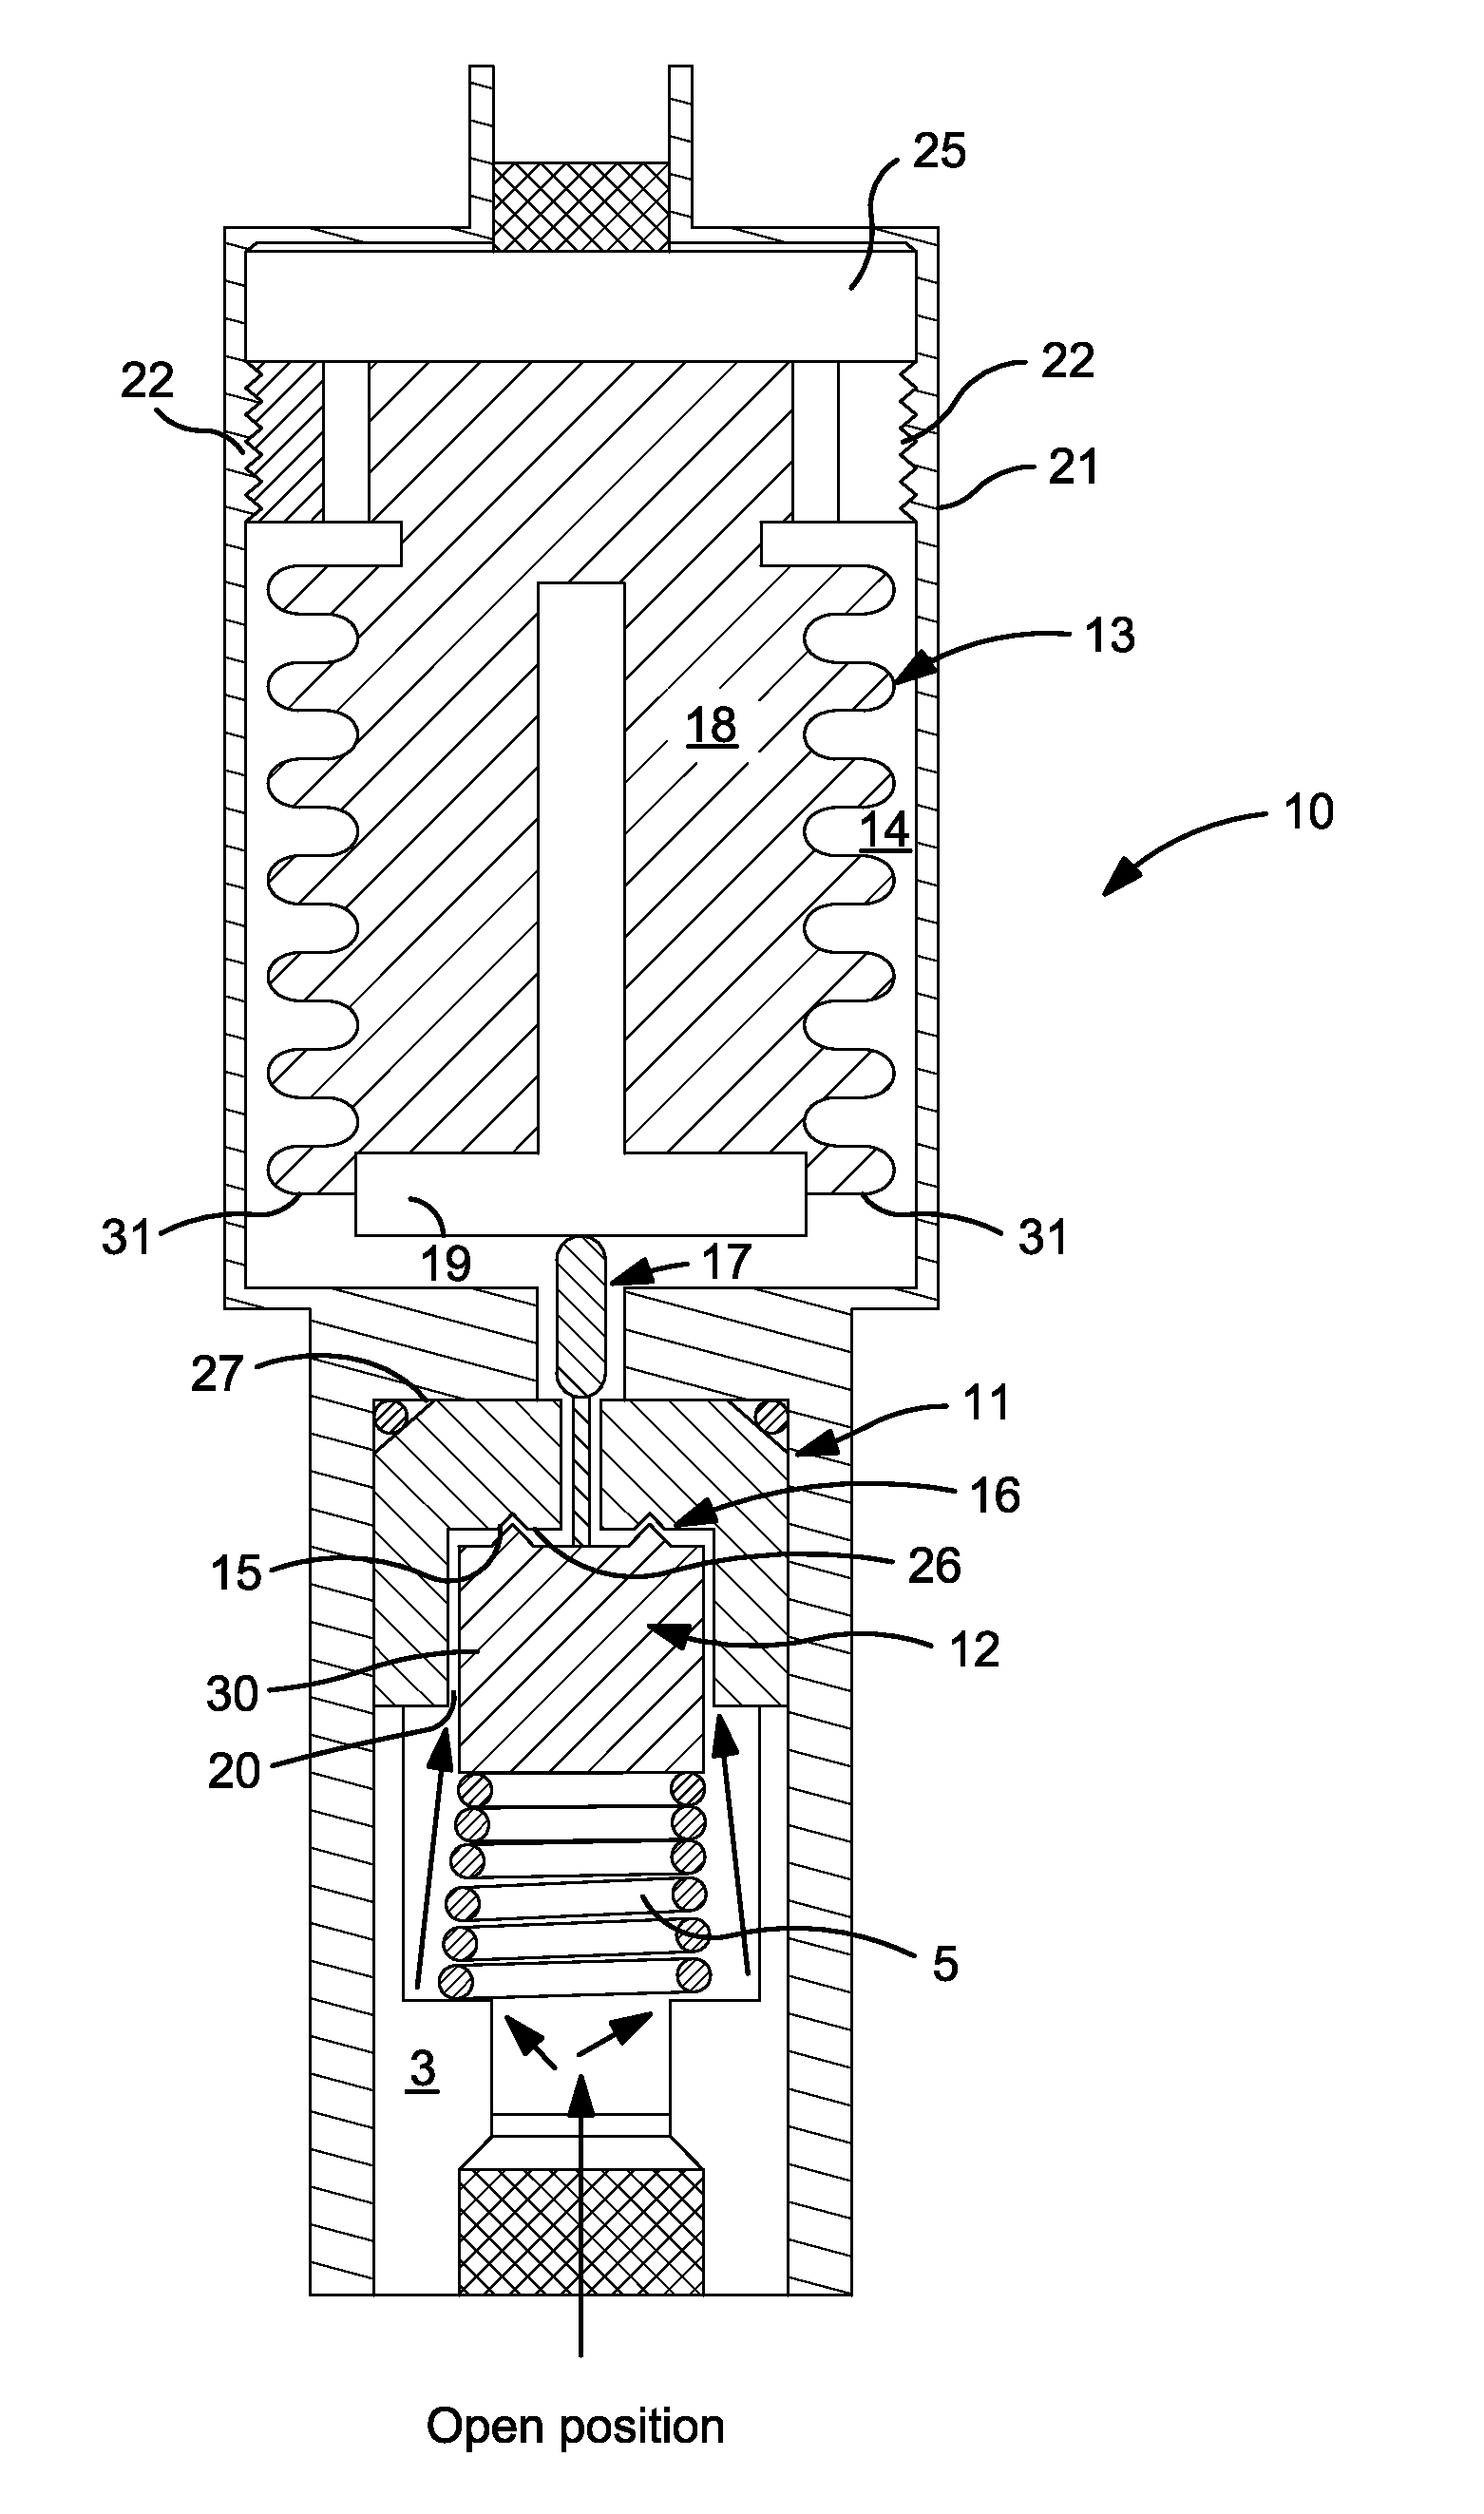 Modified vacuum actuated valve assembly and sealing mechanism for improved flow stability for fluids sub-atmospherically dispensed from storage and delivery systems